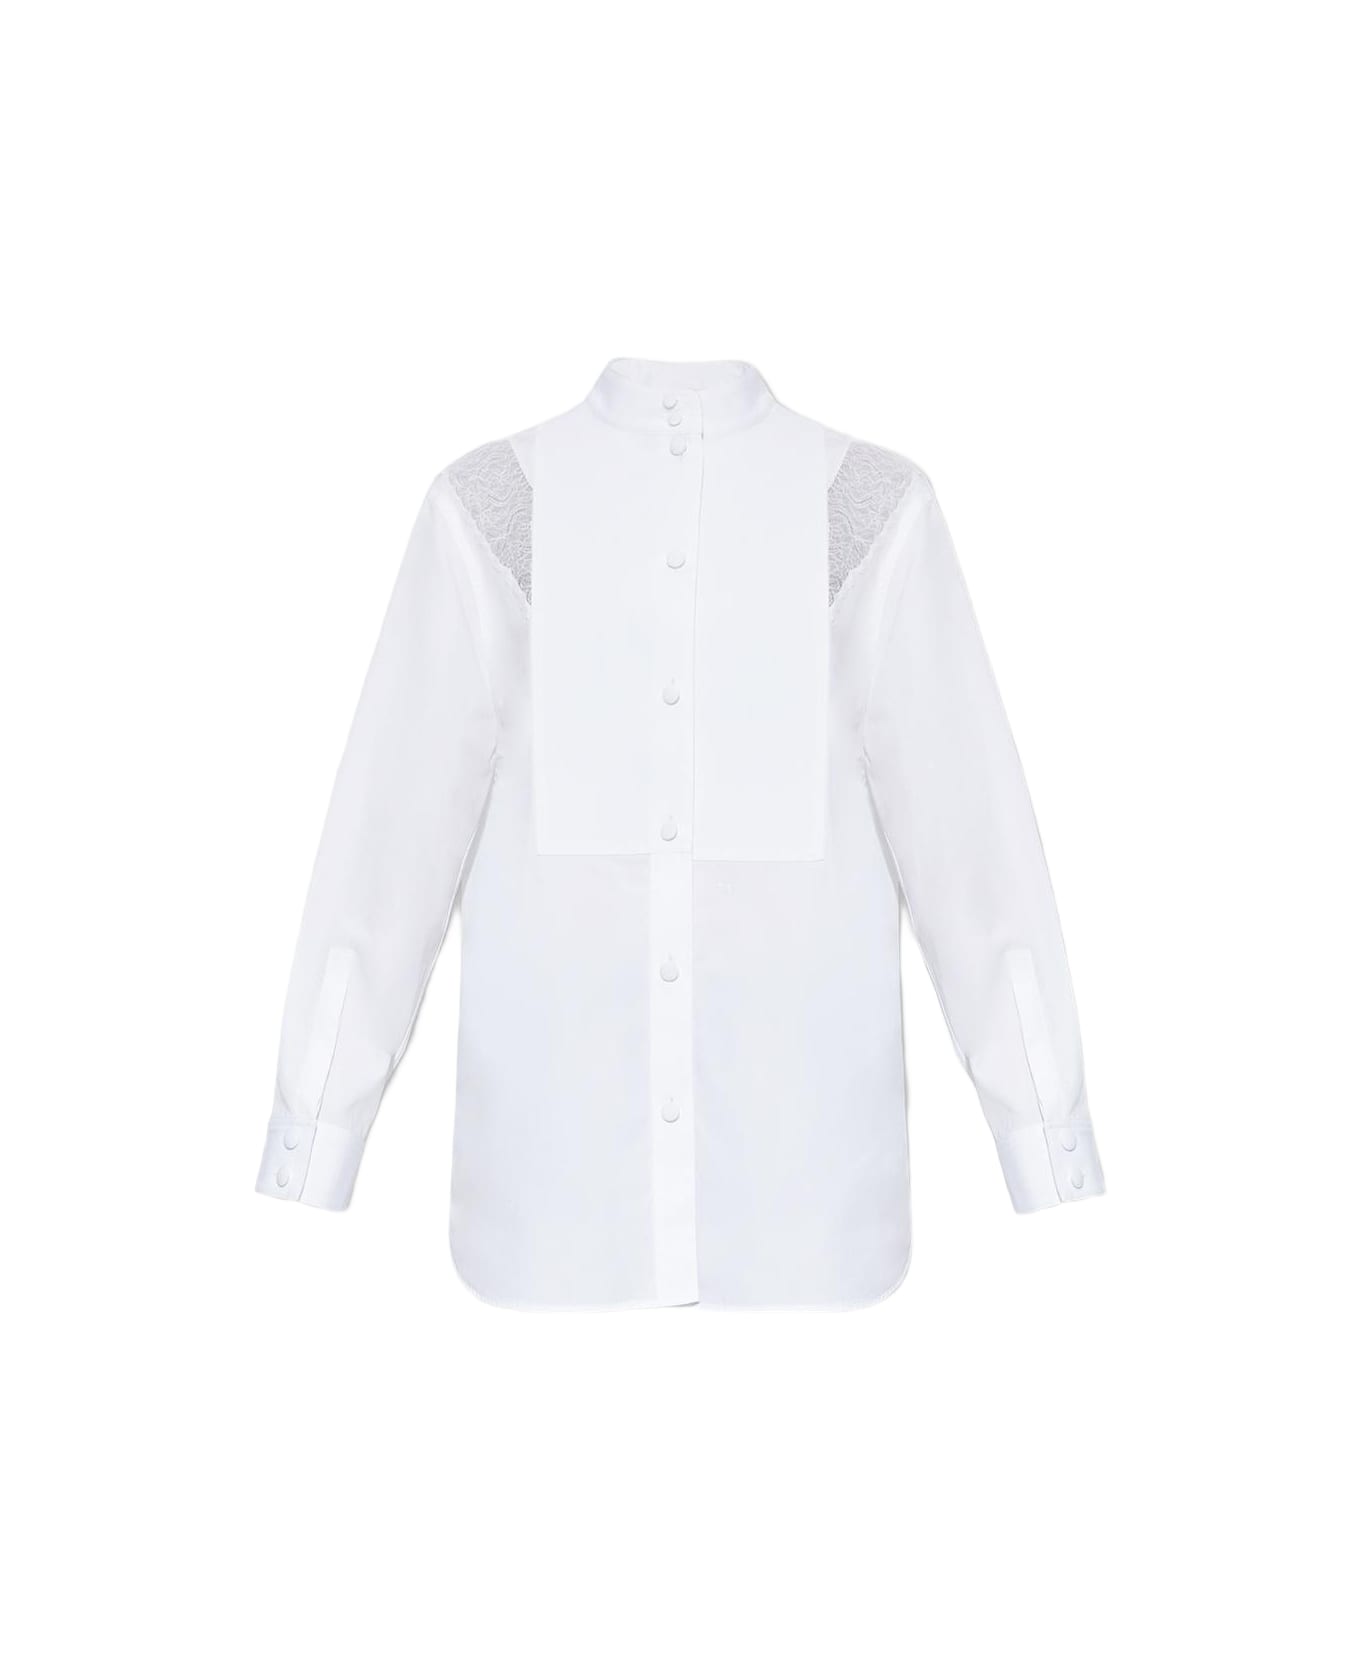 Burberry Shirt With Lace Inserts - White シャツ